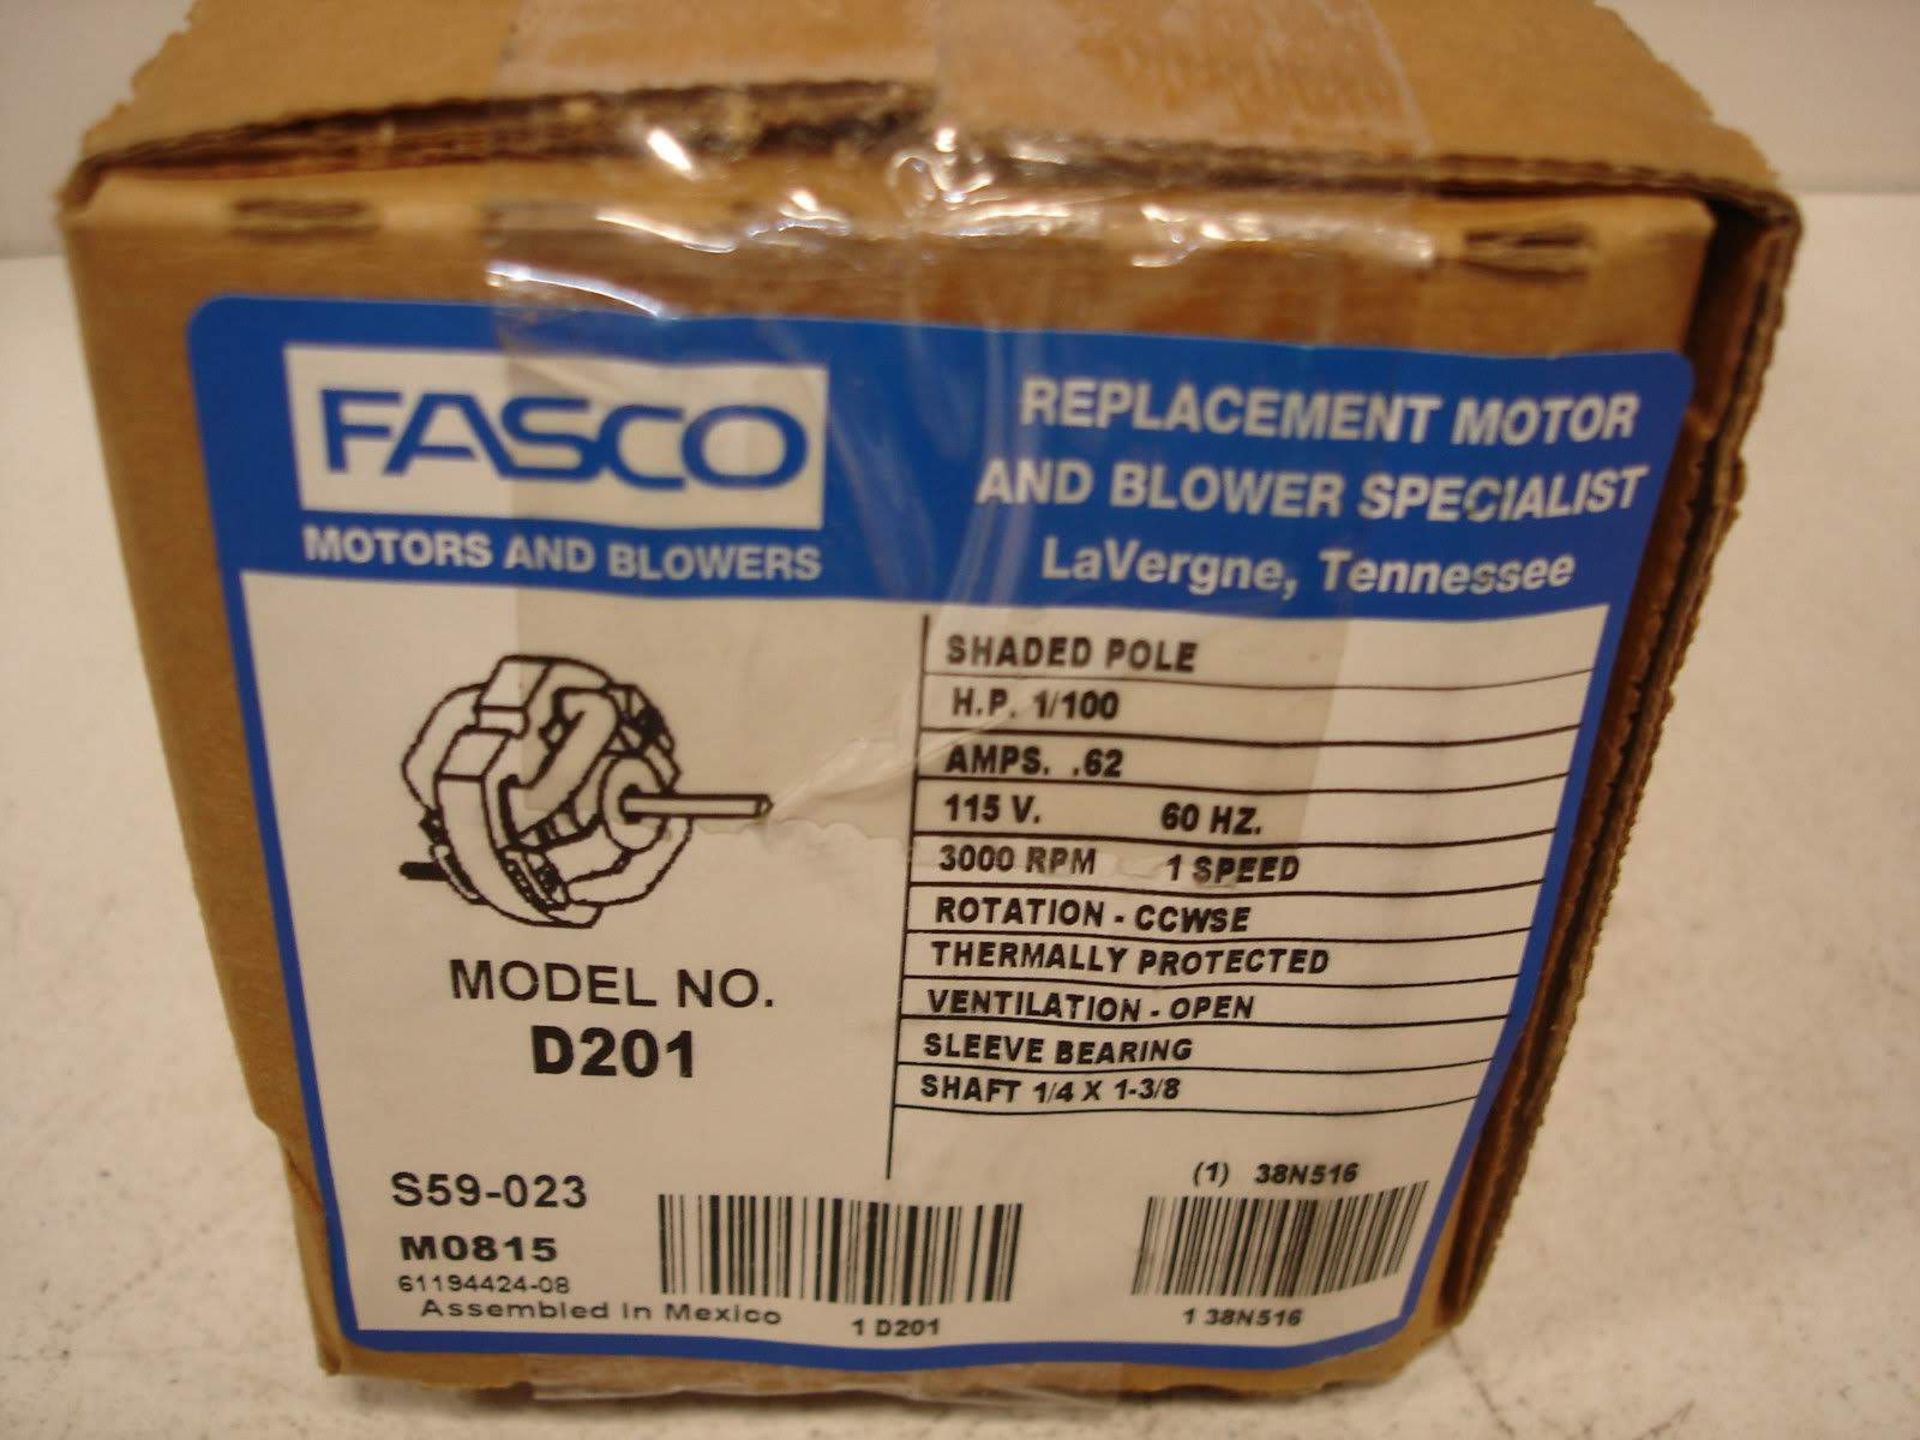 (1) *NEW* FASCO D201 SHADED POLE HP1/100 V115 RPM3000 THERMALLY PROTECTED *NEW*; (1) Fasco D121 3. - Image 2 of 4